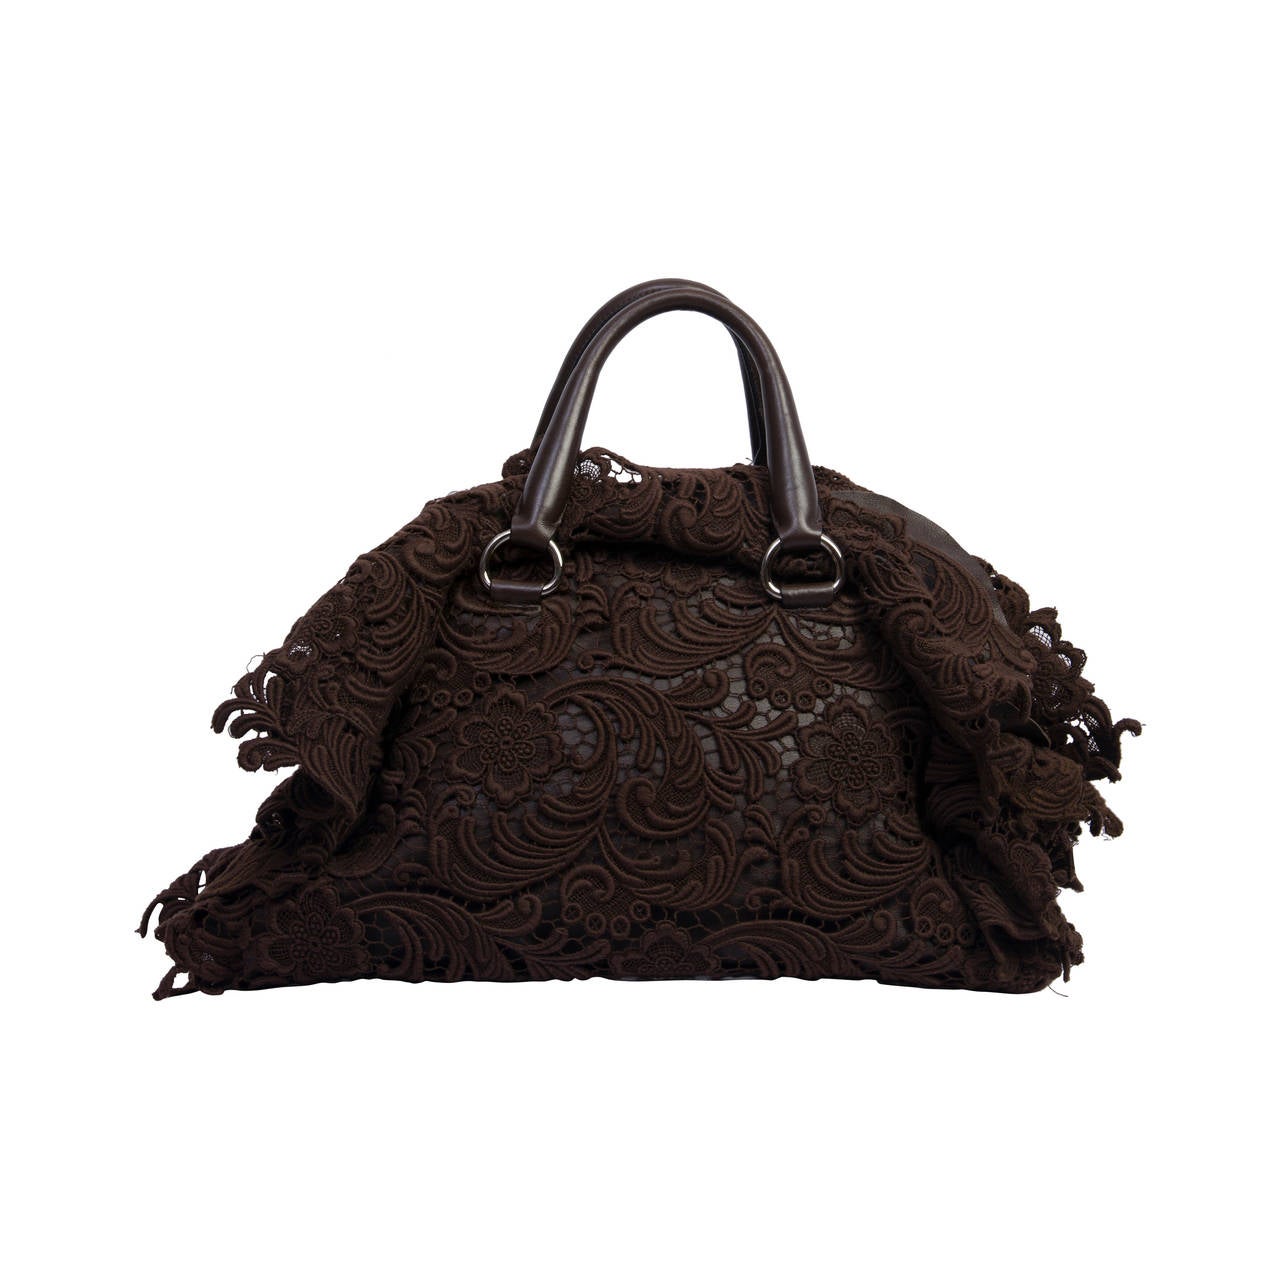 2007s Prada Pizzo Lace Covered Leather Bowling Bag in Brown